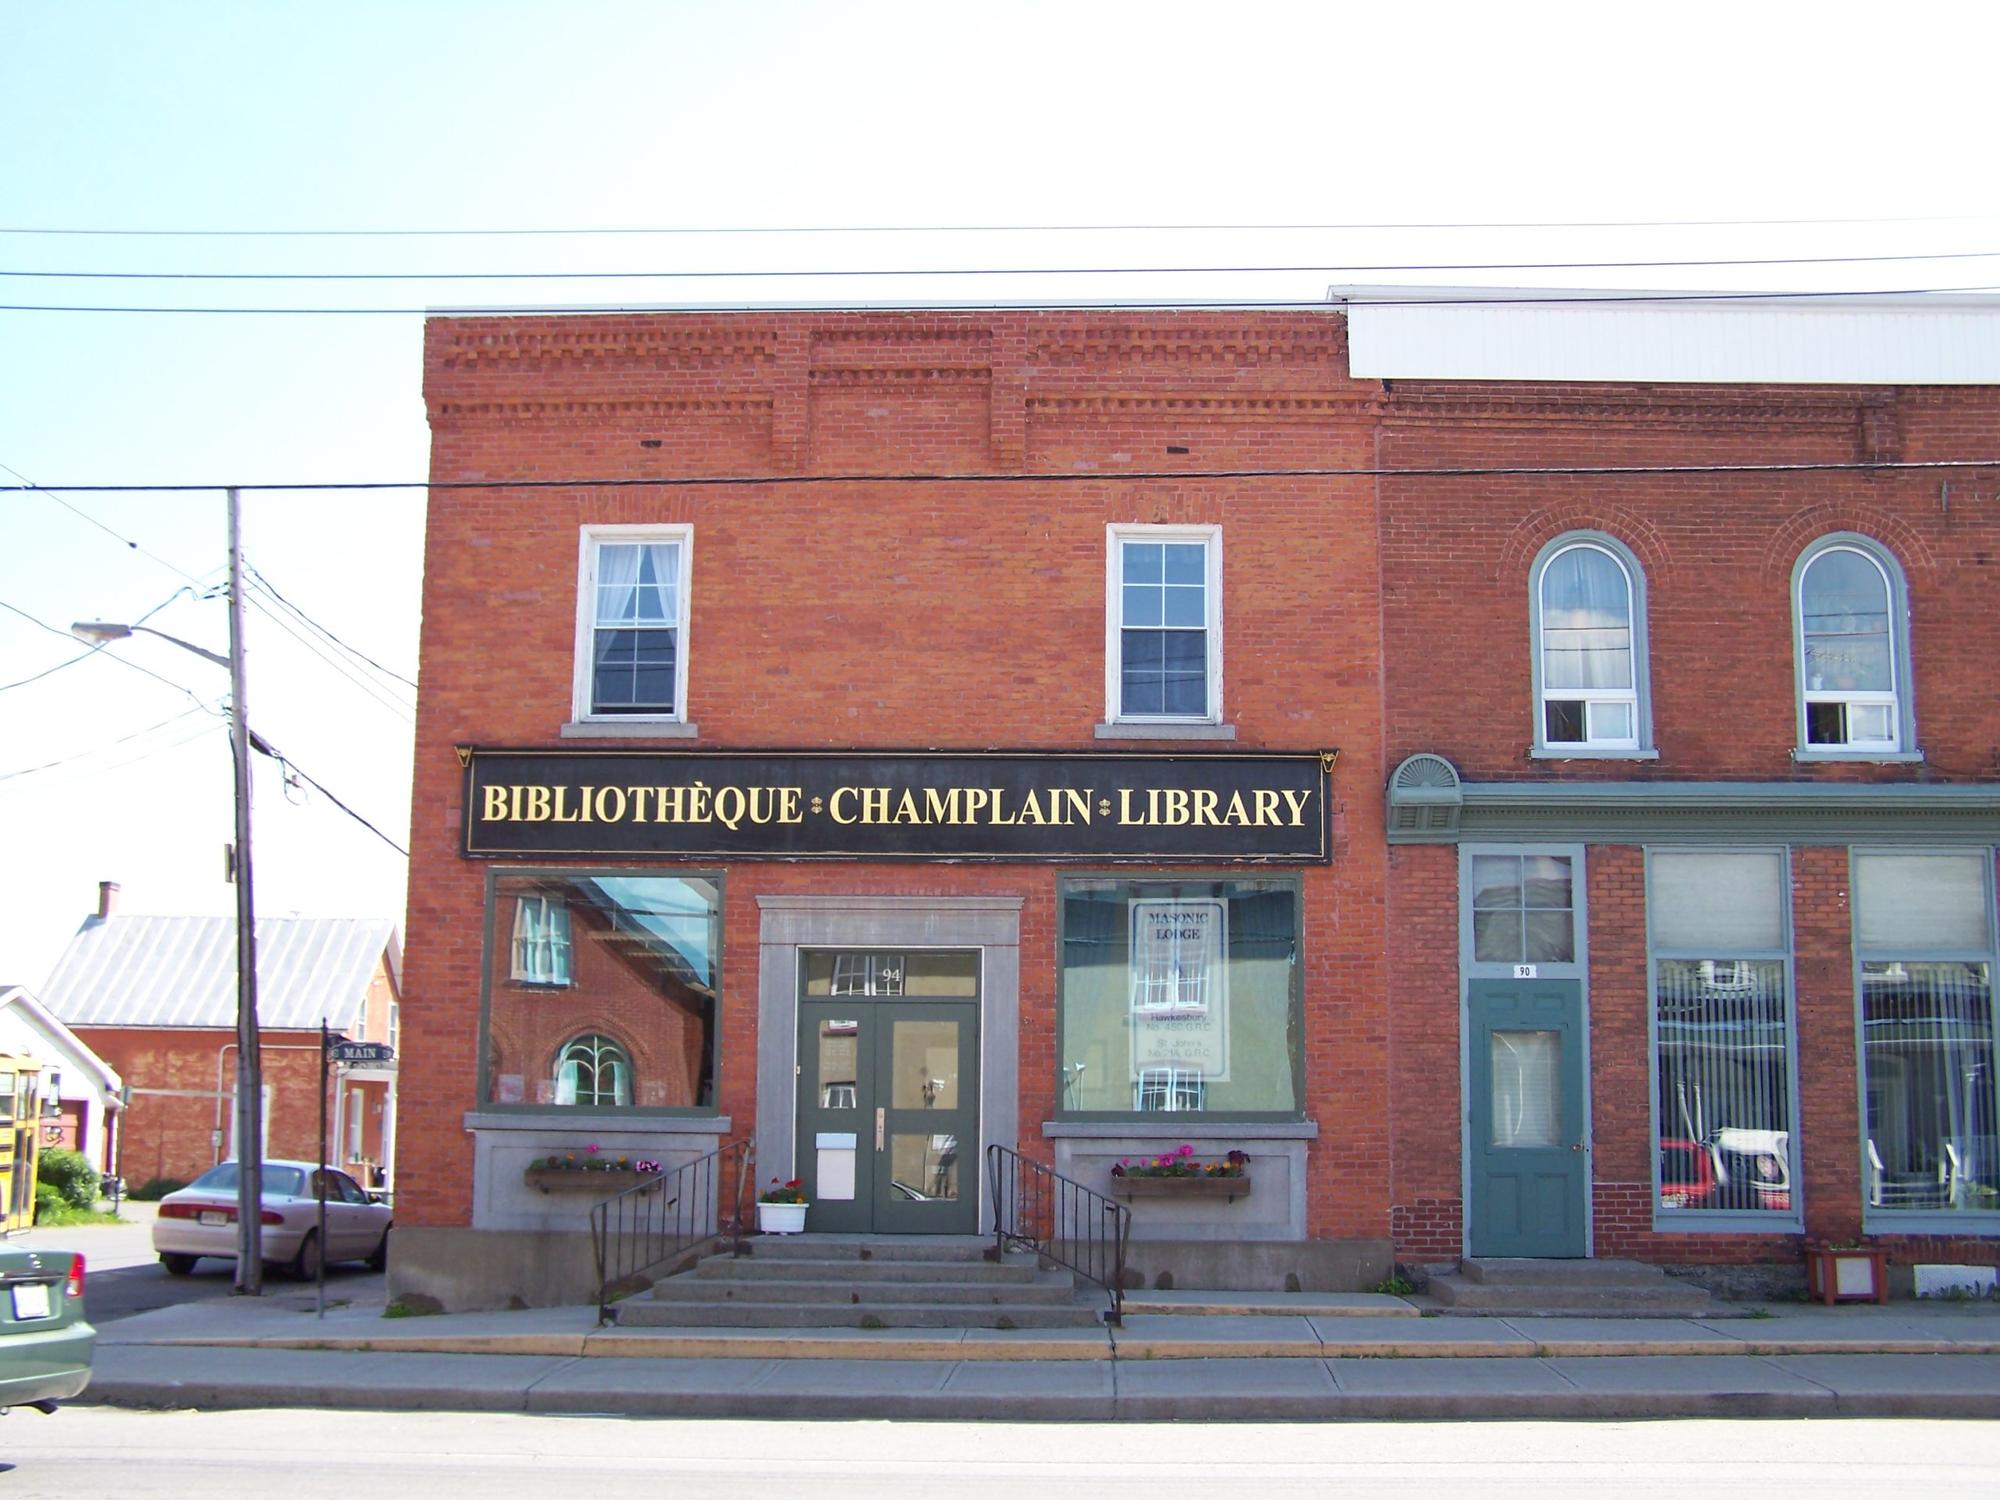 Phase one of work to mitigate undefined safety issues begins at Champlain Library